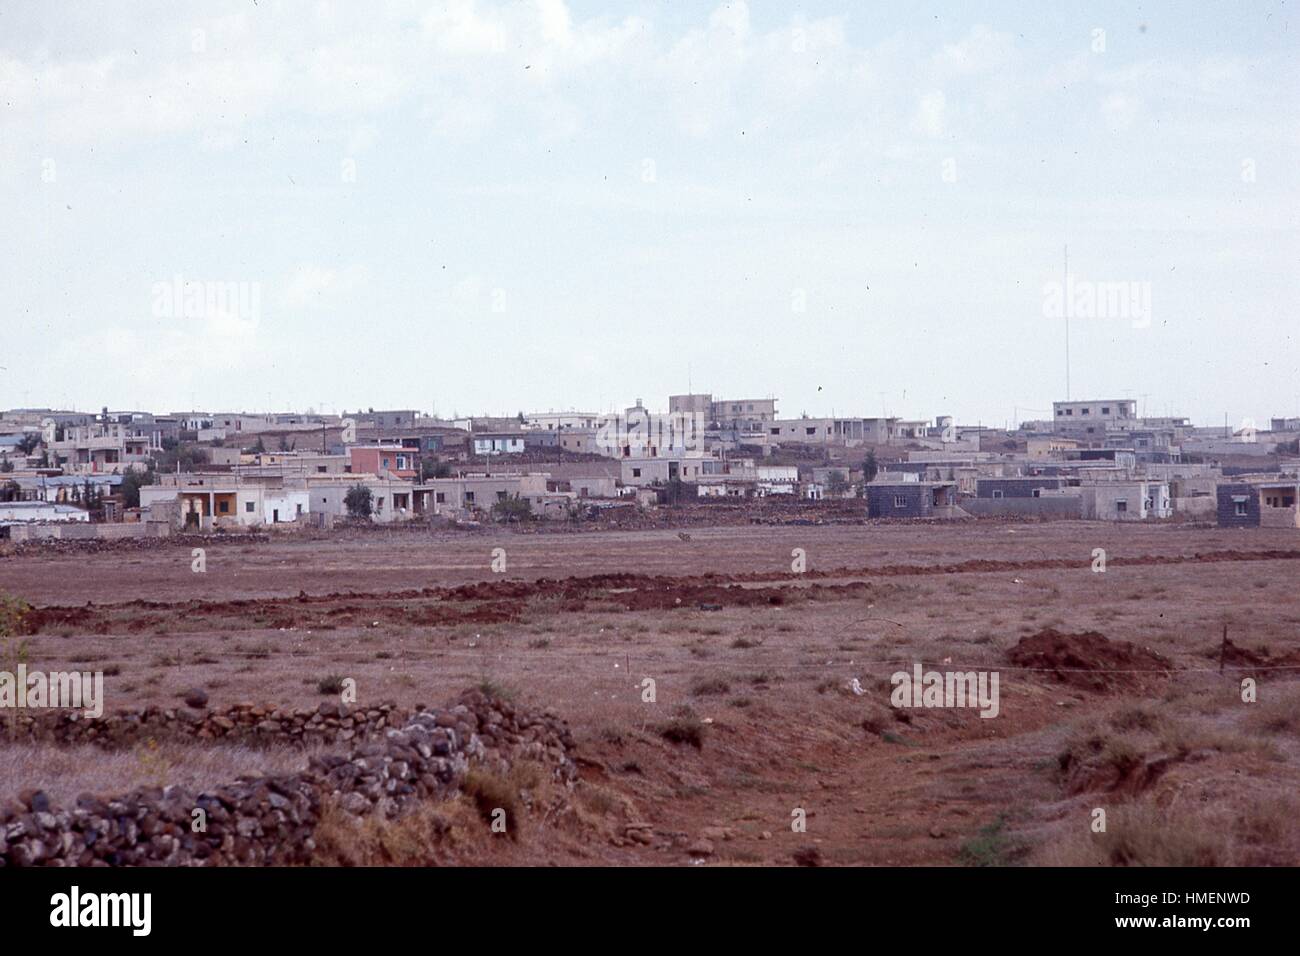 View from a distance facing south, showing the buildings and structures of the town of Quneitra, Syria, on the border with Israel in the Golan Heights, Israel, November, 1967. Stock Photo